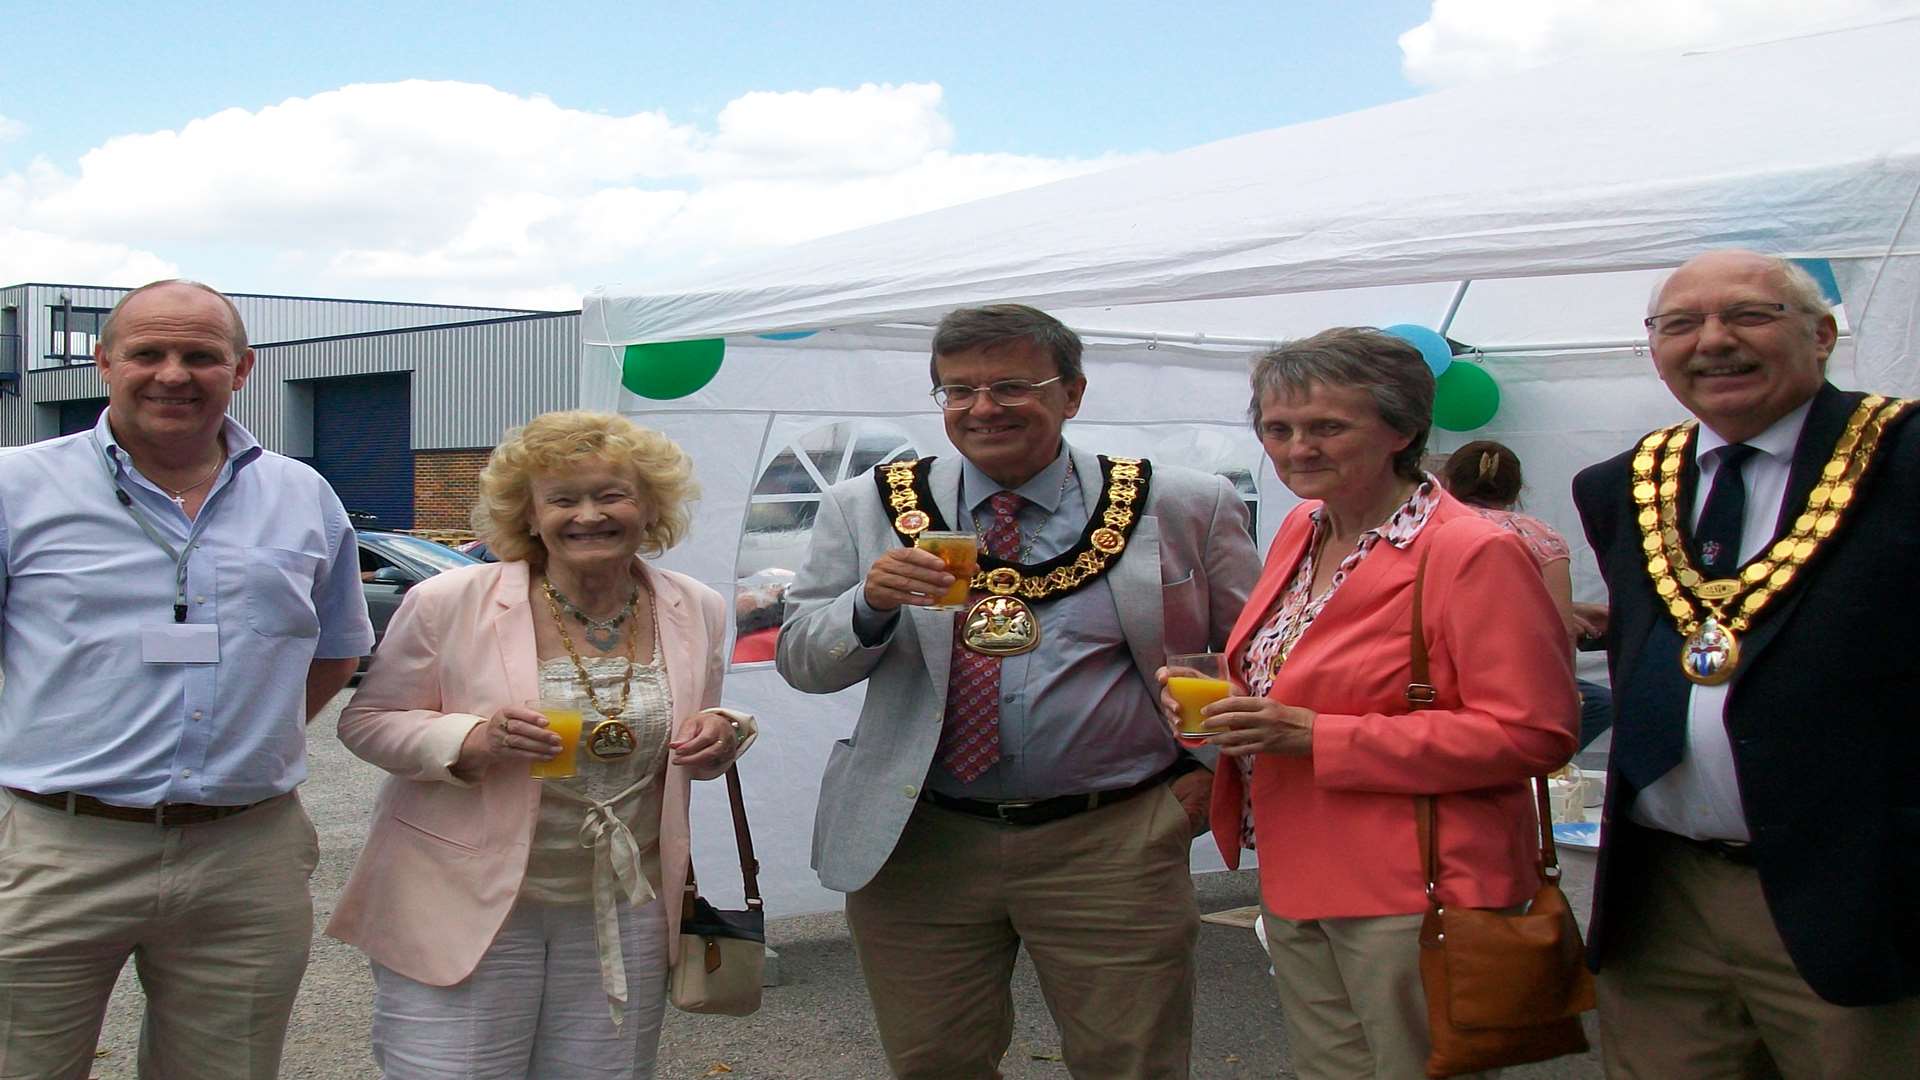 Both the Mayor and Mayoress of Tunbridge Wells and Tonbridge and Malling attended the event